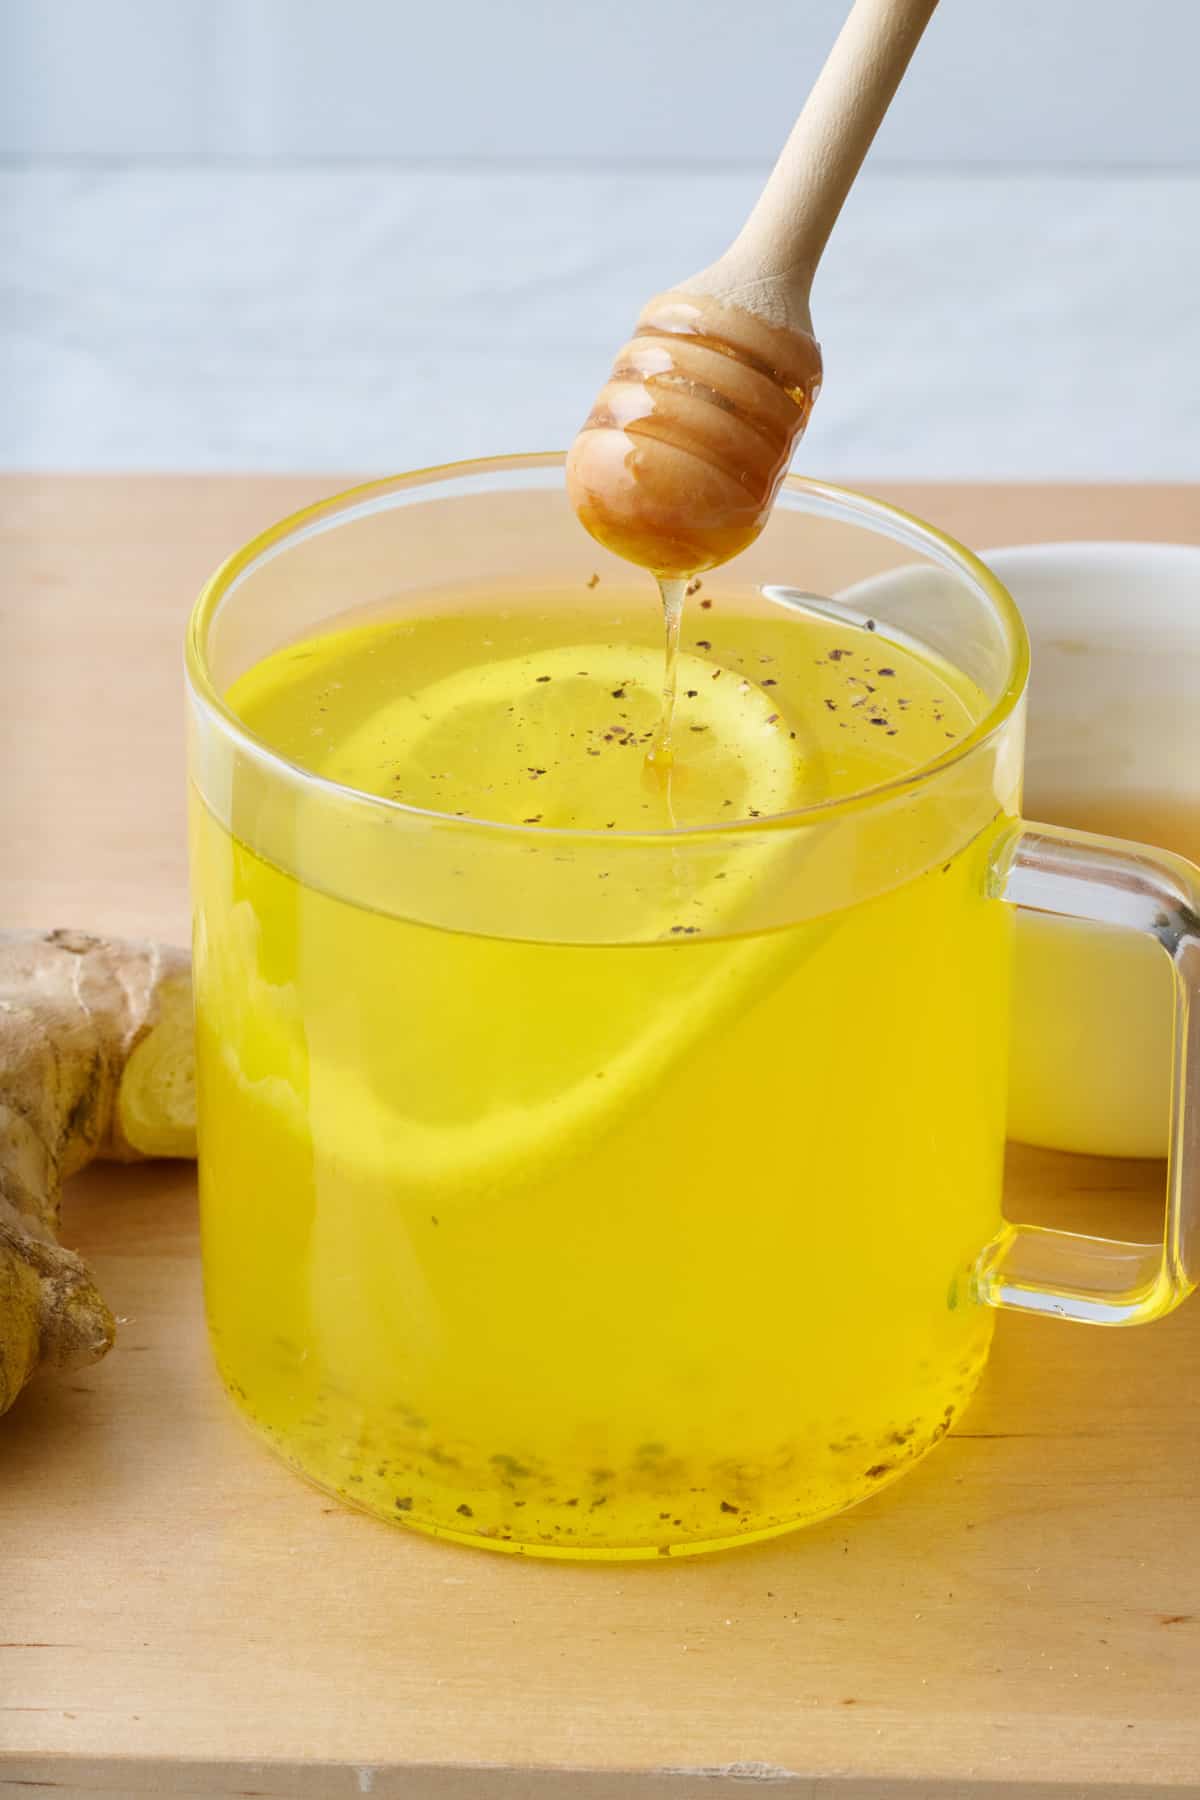 Honey being drizzled into Ginger Turmeric Tea